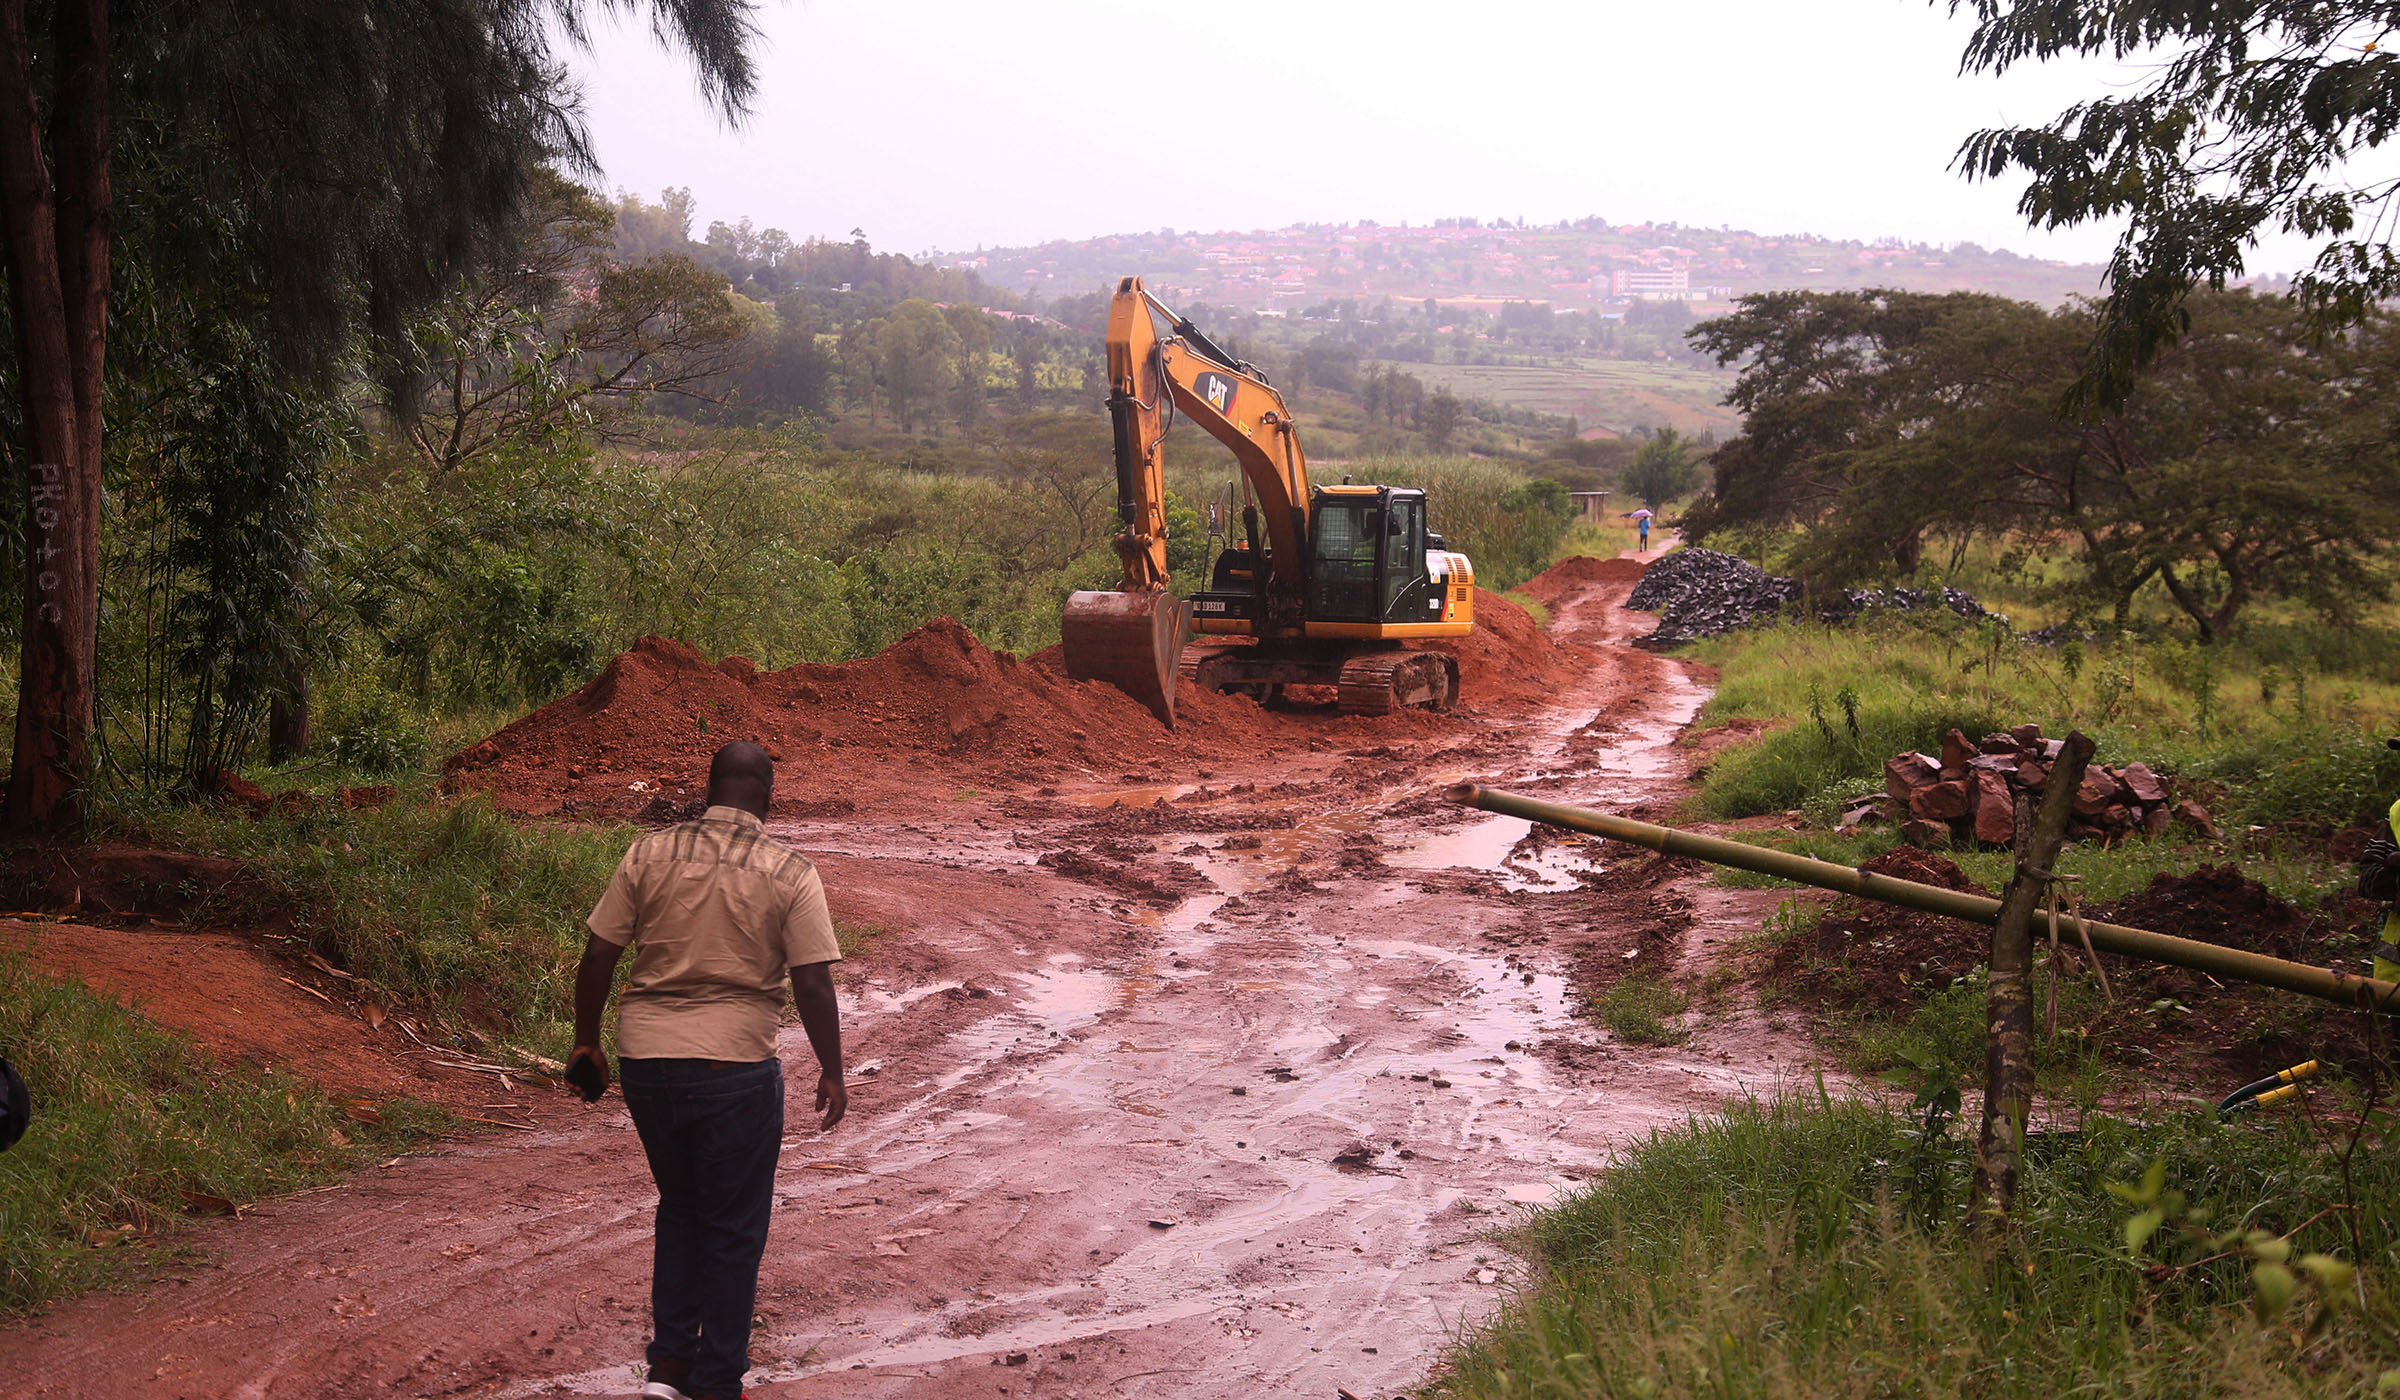 Nyandungu Urban Wetland Eco-Tourism park that is under rehabilitation. According to Jules Djangwani, the project coordinator at Rwanda Environment Management Authority (pictured), the construction works will be completed in 36 months. Sam Ngendahimana.